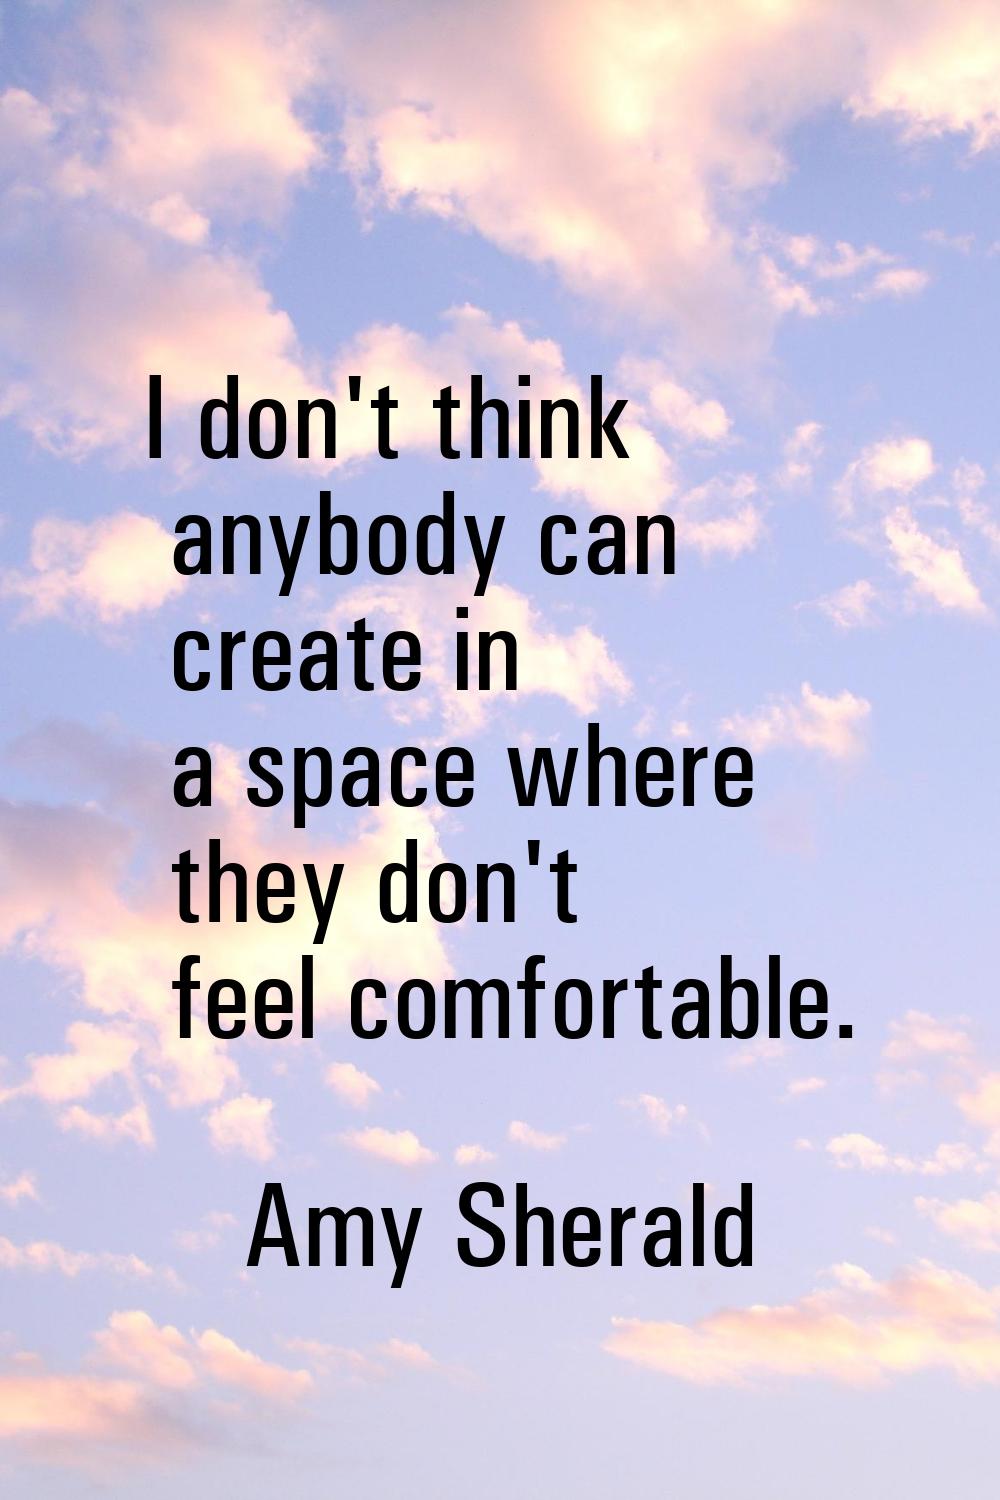 I don't think anybody can create in a space where they don't feel comfortable.